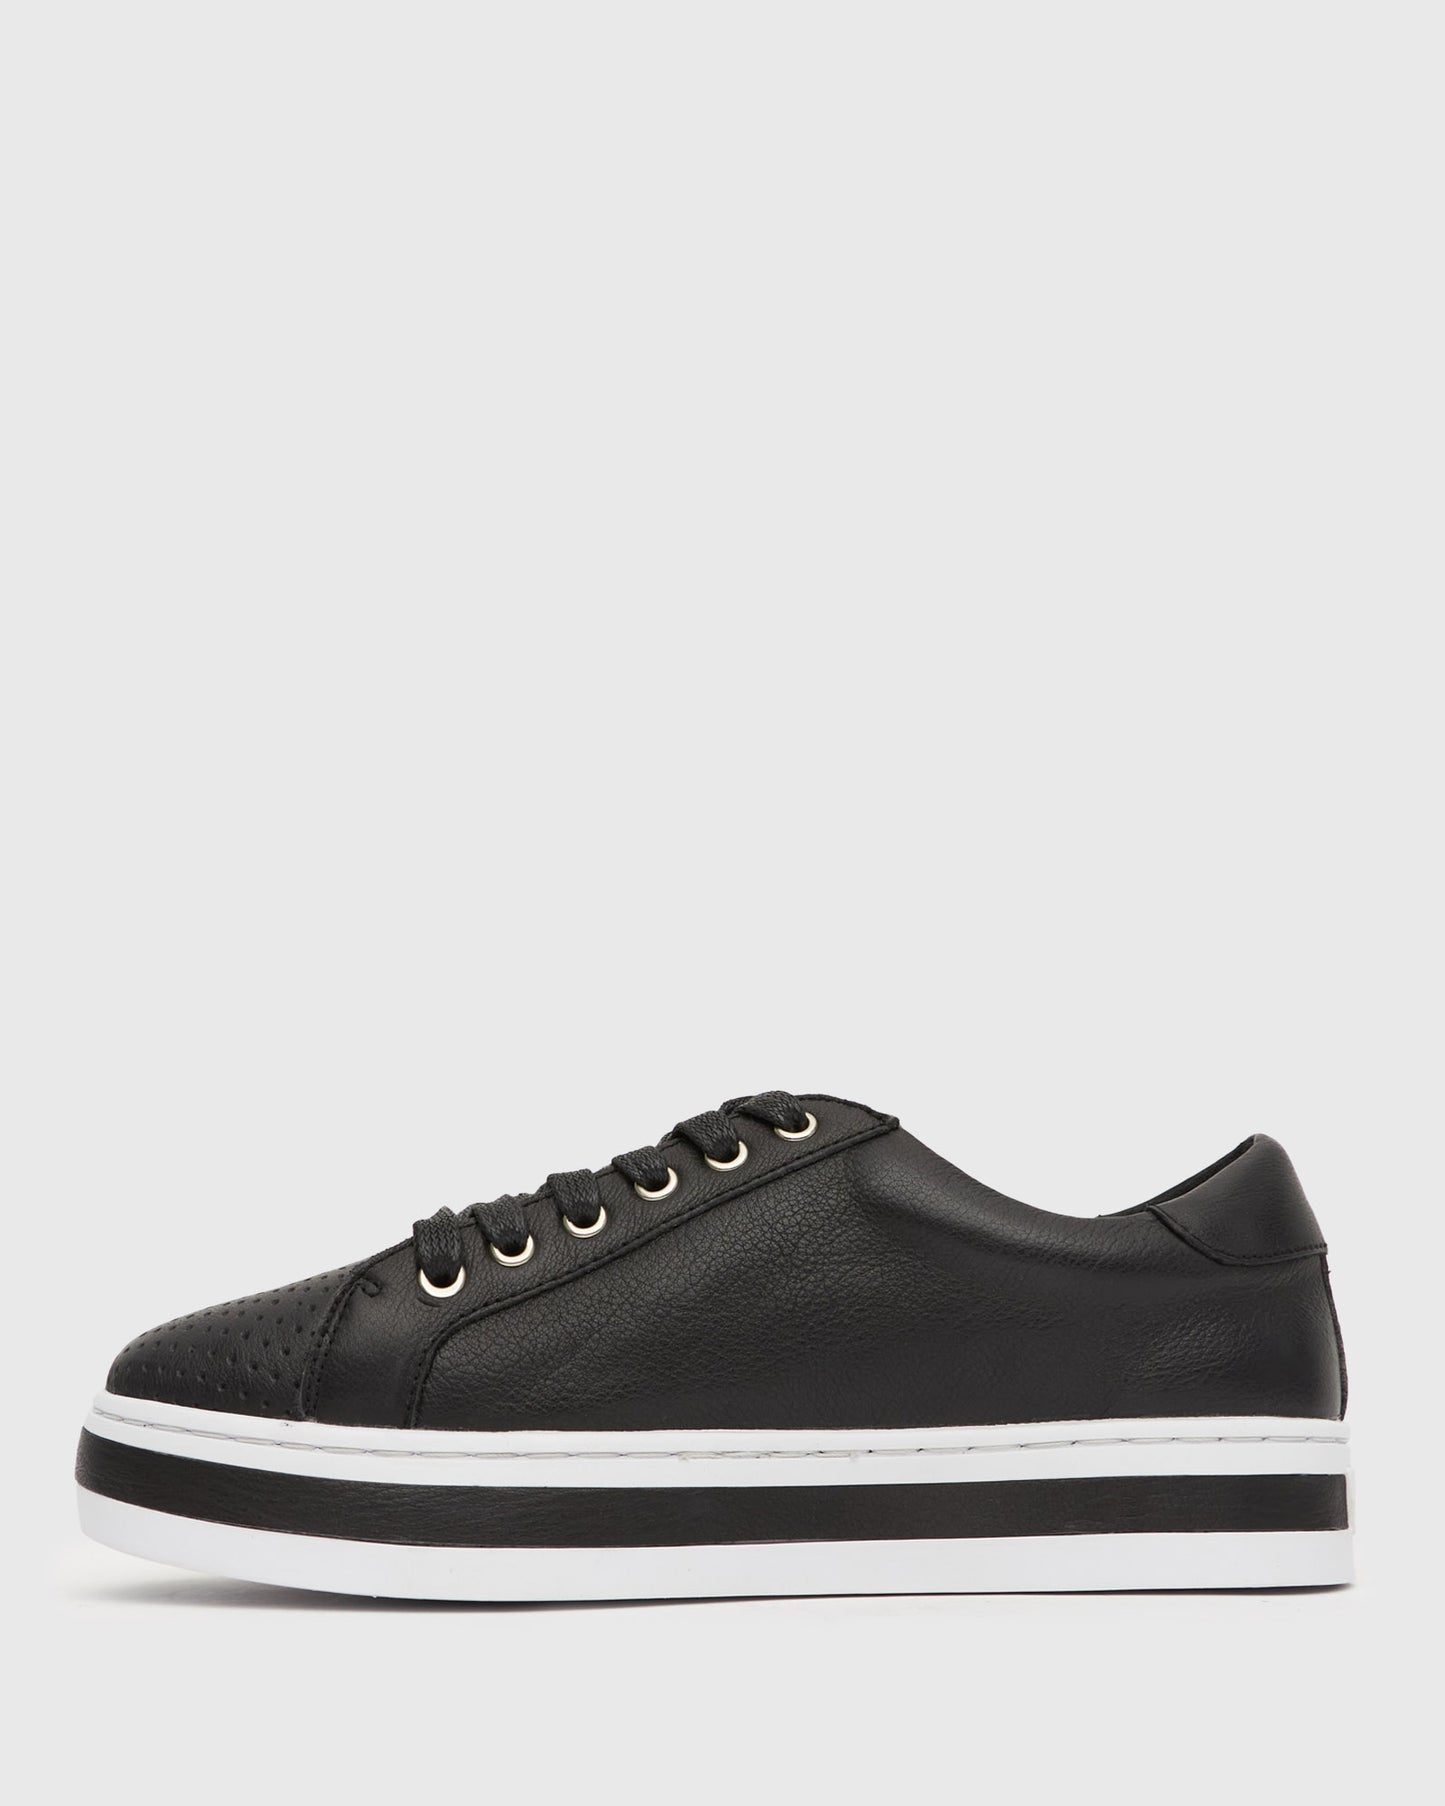 KIMMY Leather Platform Sneakers